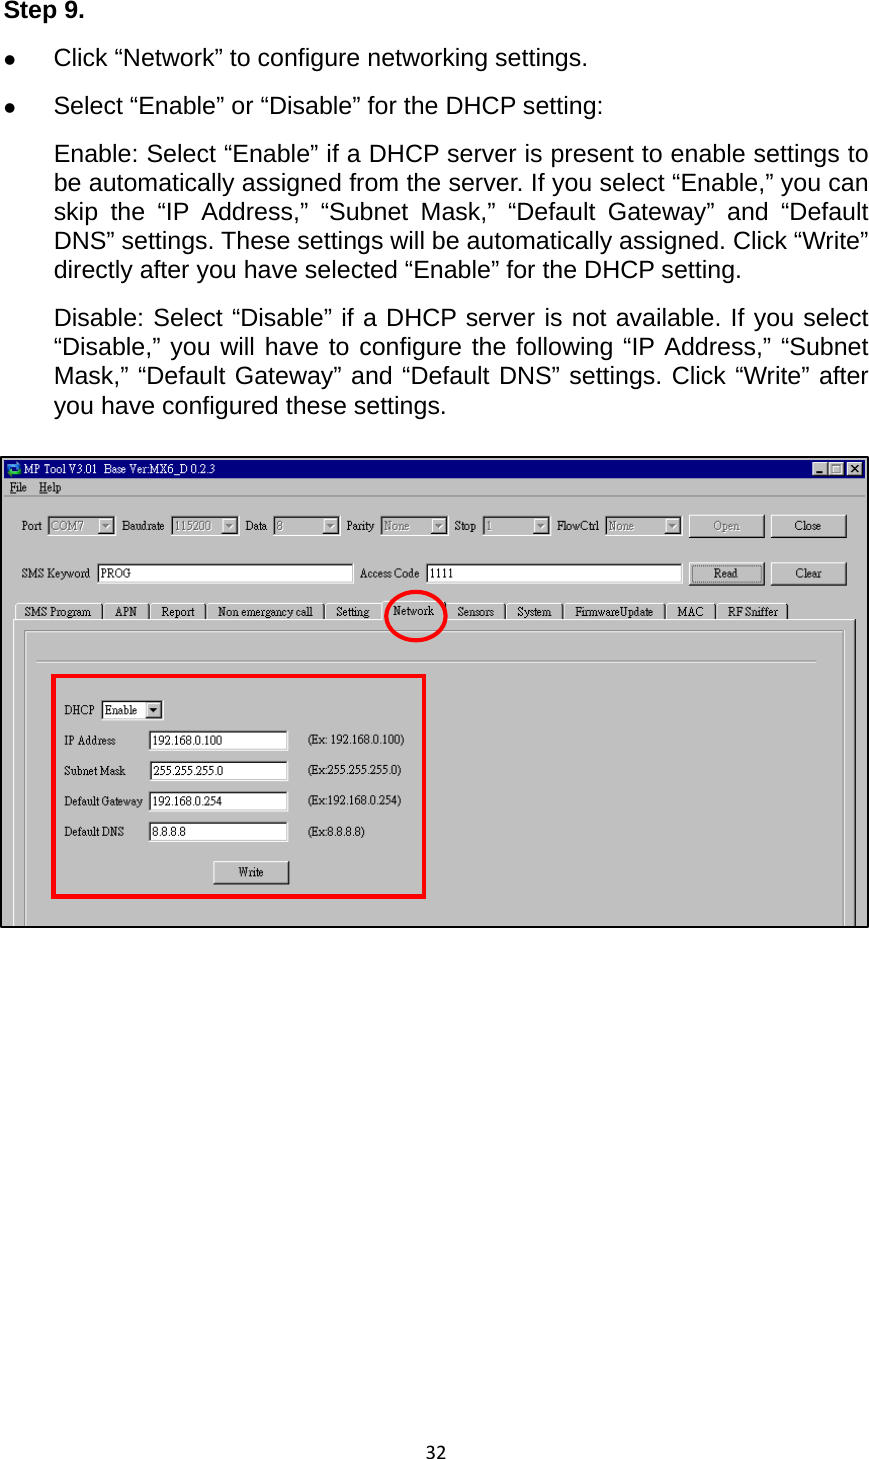 32Step 9.   z Click “Network” to configure networking settings.   z Select “Enable” or “Disable” for the DHCP setting:   Enable: Select “Enable” if a DHCP server is present to enable settings to be automatically assigned from the server. If you select “Enable,” you can skip the “IP Address,” “Subnet Mask,” “Default Gateway” and “Default DNS” settings. These settings will be automatically assigned. Click “Write” directly after you have selected “Enable” for the DHCP setting.   Disable: Select “Disable” if a DHCP server is not available. If you select “Disable,” you will have to configure the following “IP Address,” “Subnet Mask,” “Default Gateway” and “Default DNS” settings. Click “Write” after you have configured these settings.              